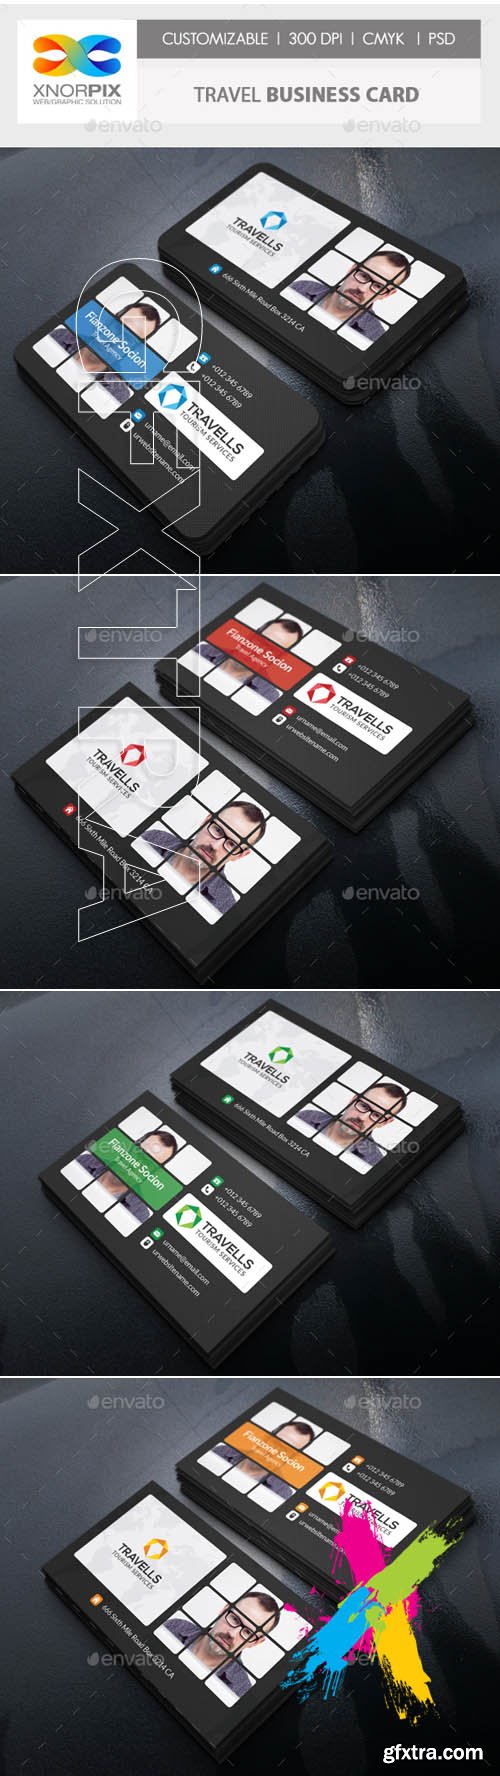 Graphicriver - Travel Business Card 20203580